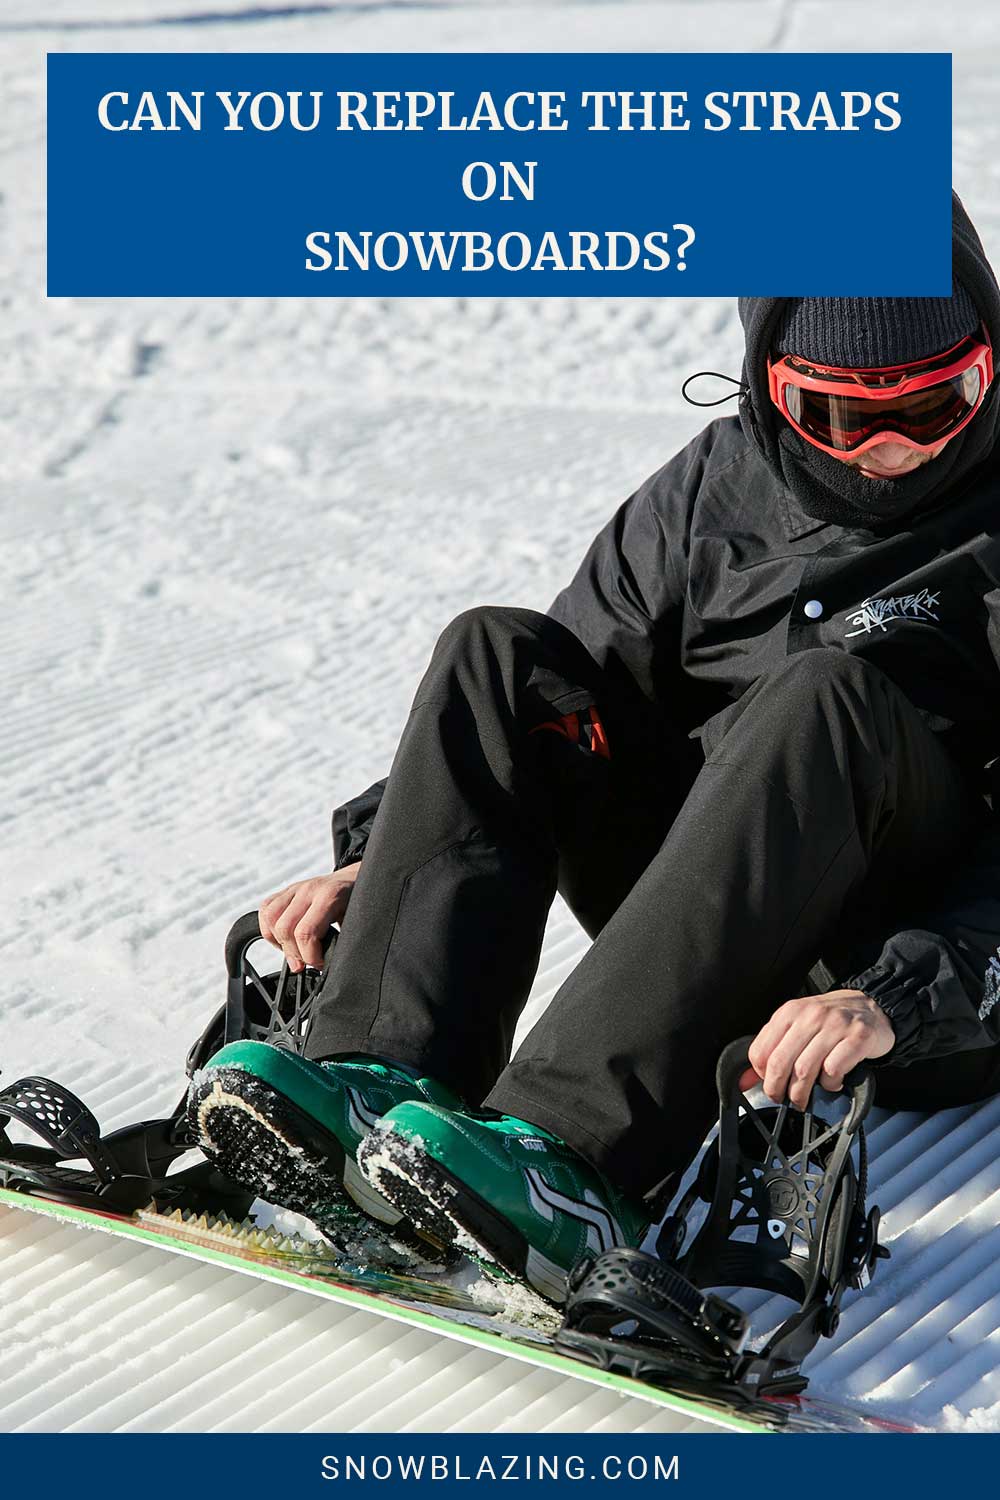 Man sitting and holding the bindings of a snowboard - Can You Replace The Straps On Snowboards?